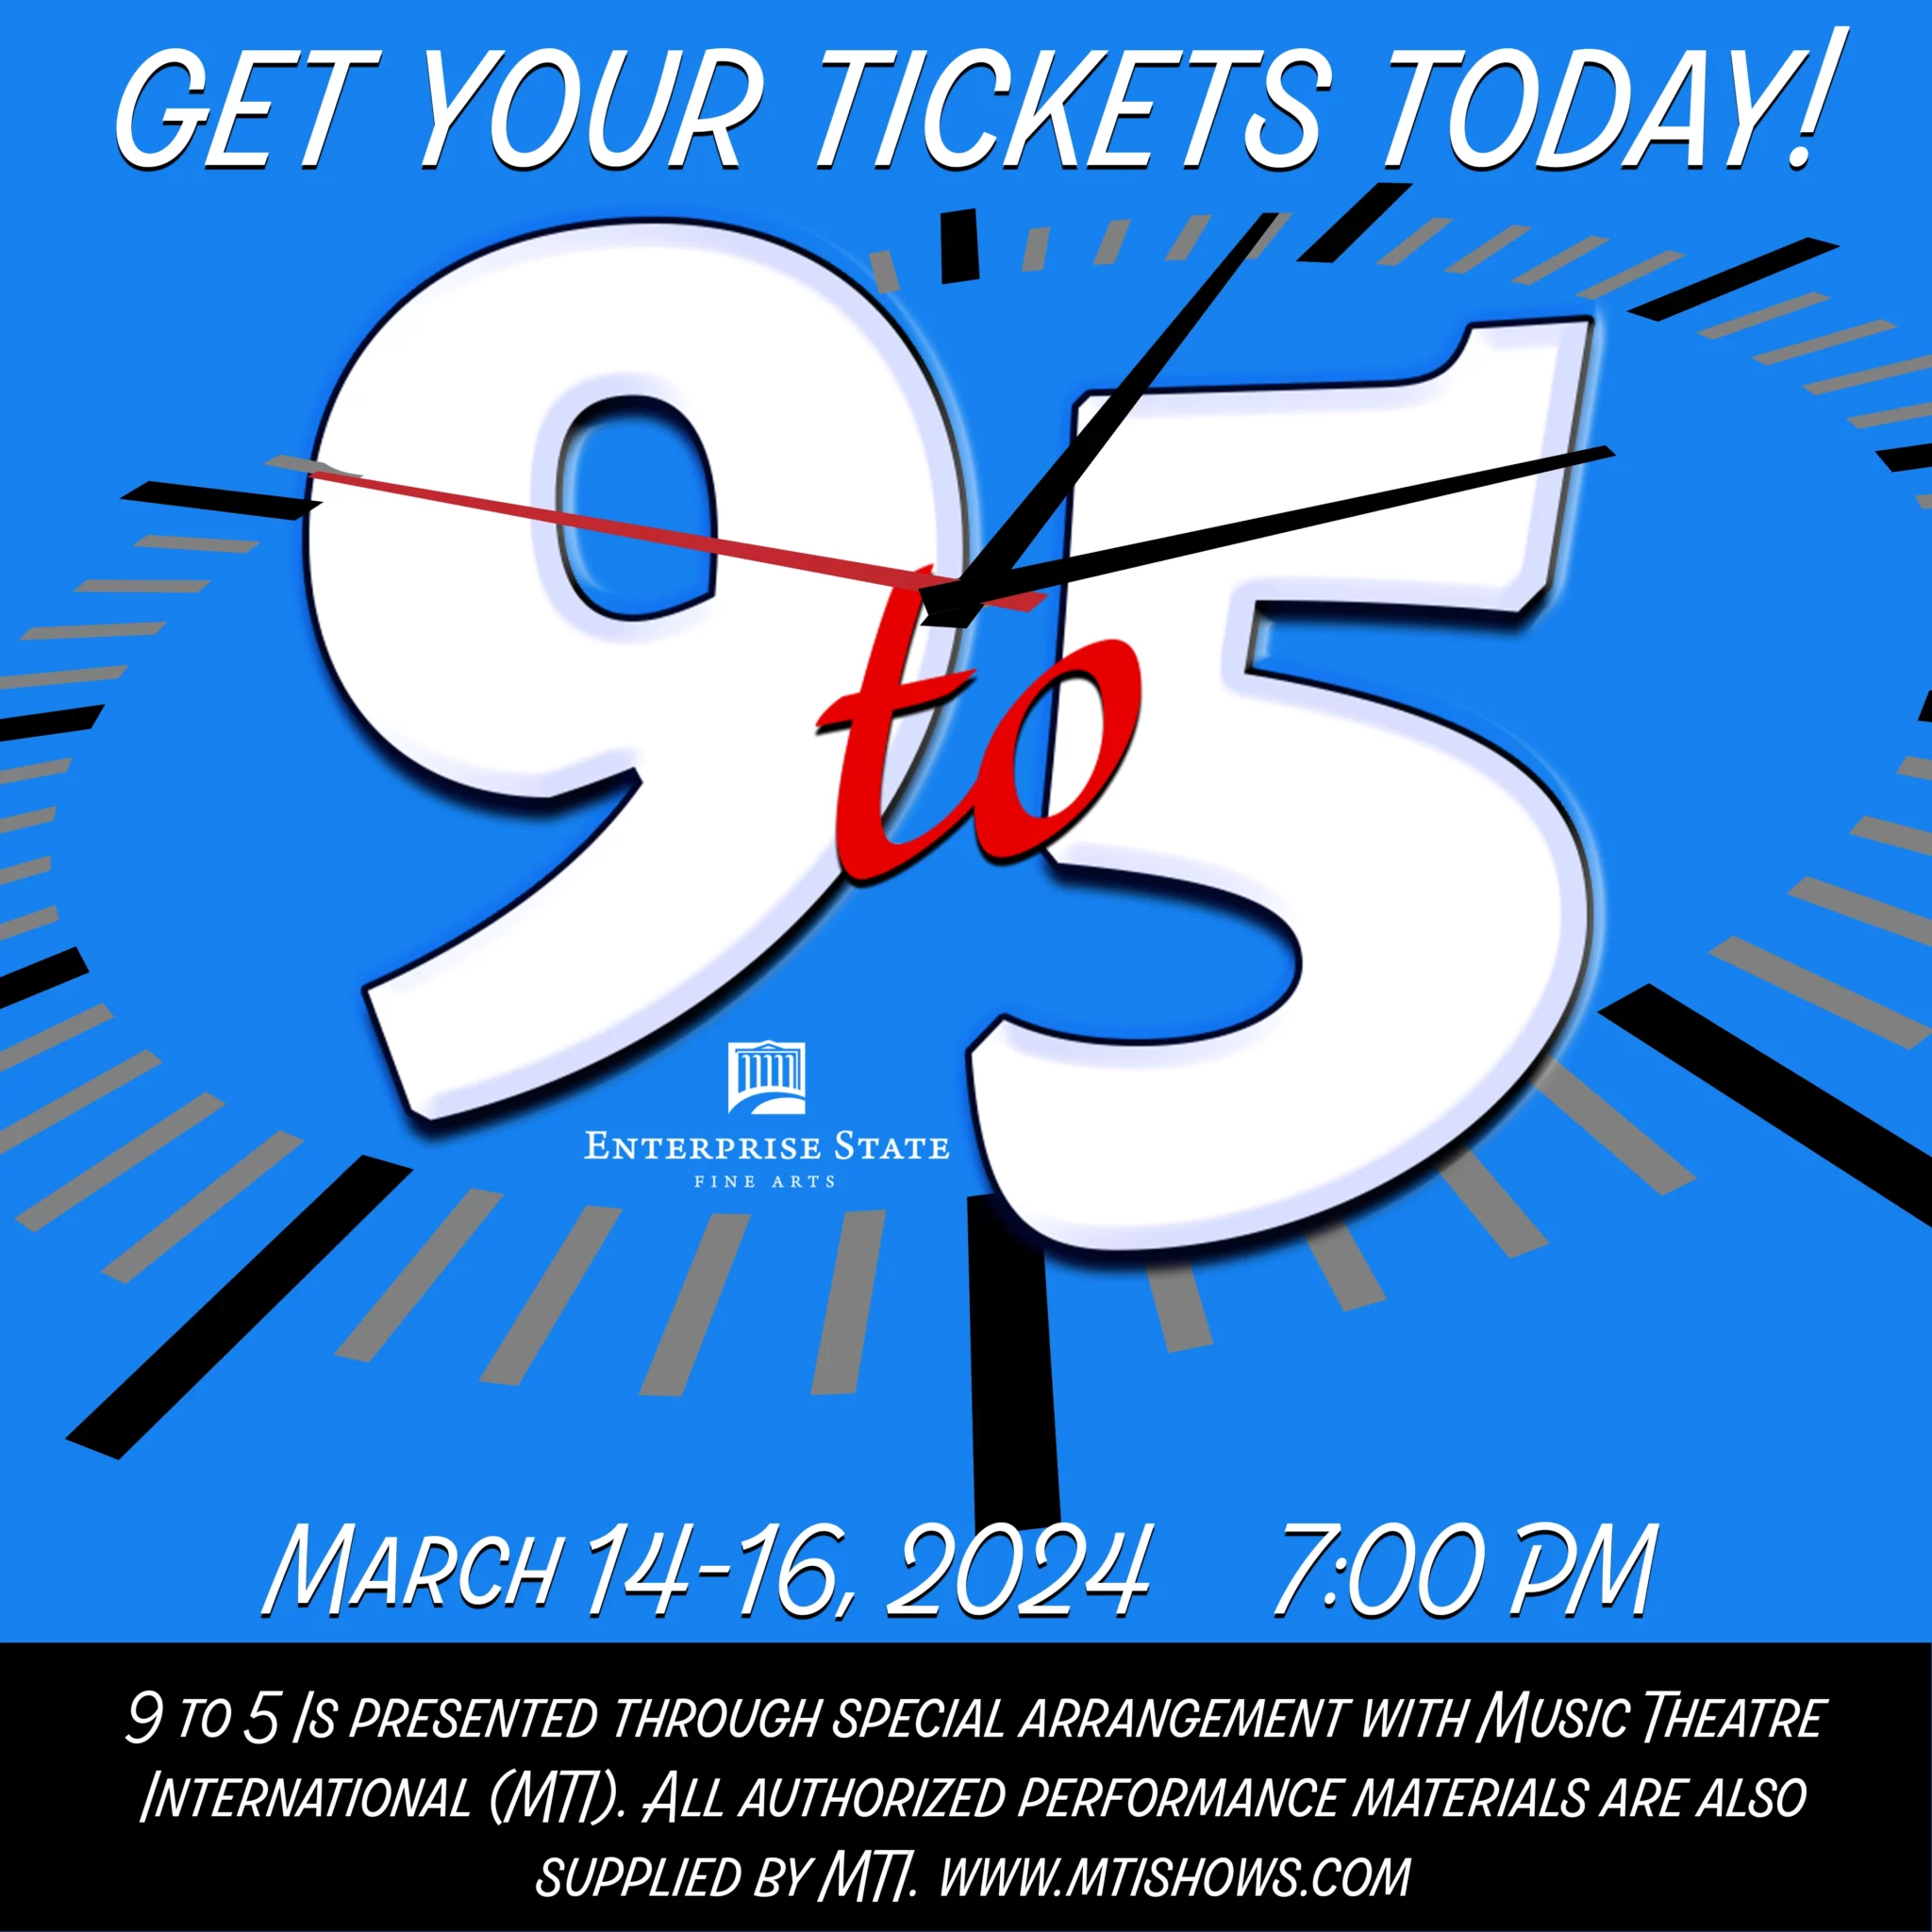 ESCC showcasing student, community talent in “9 to 5”